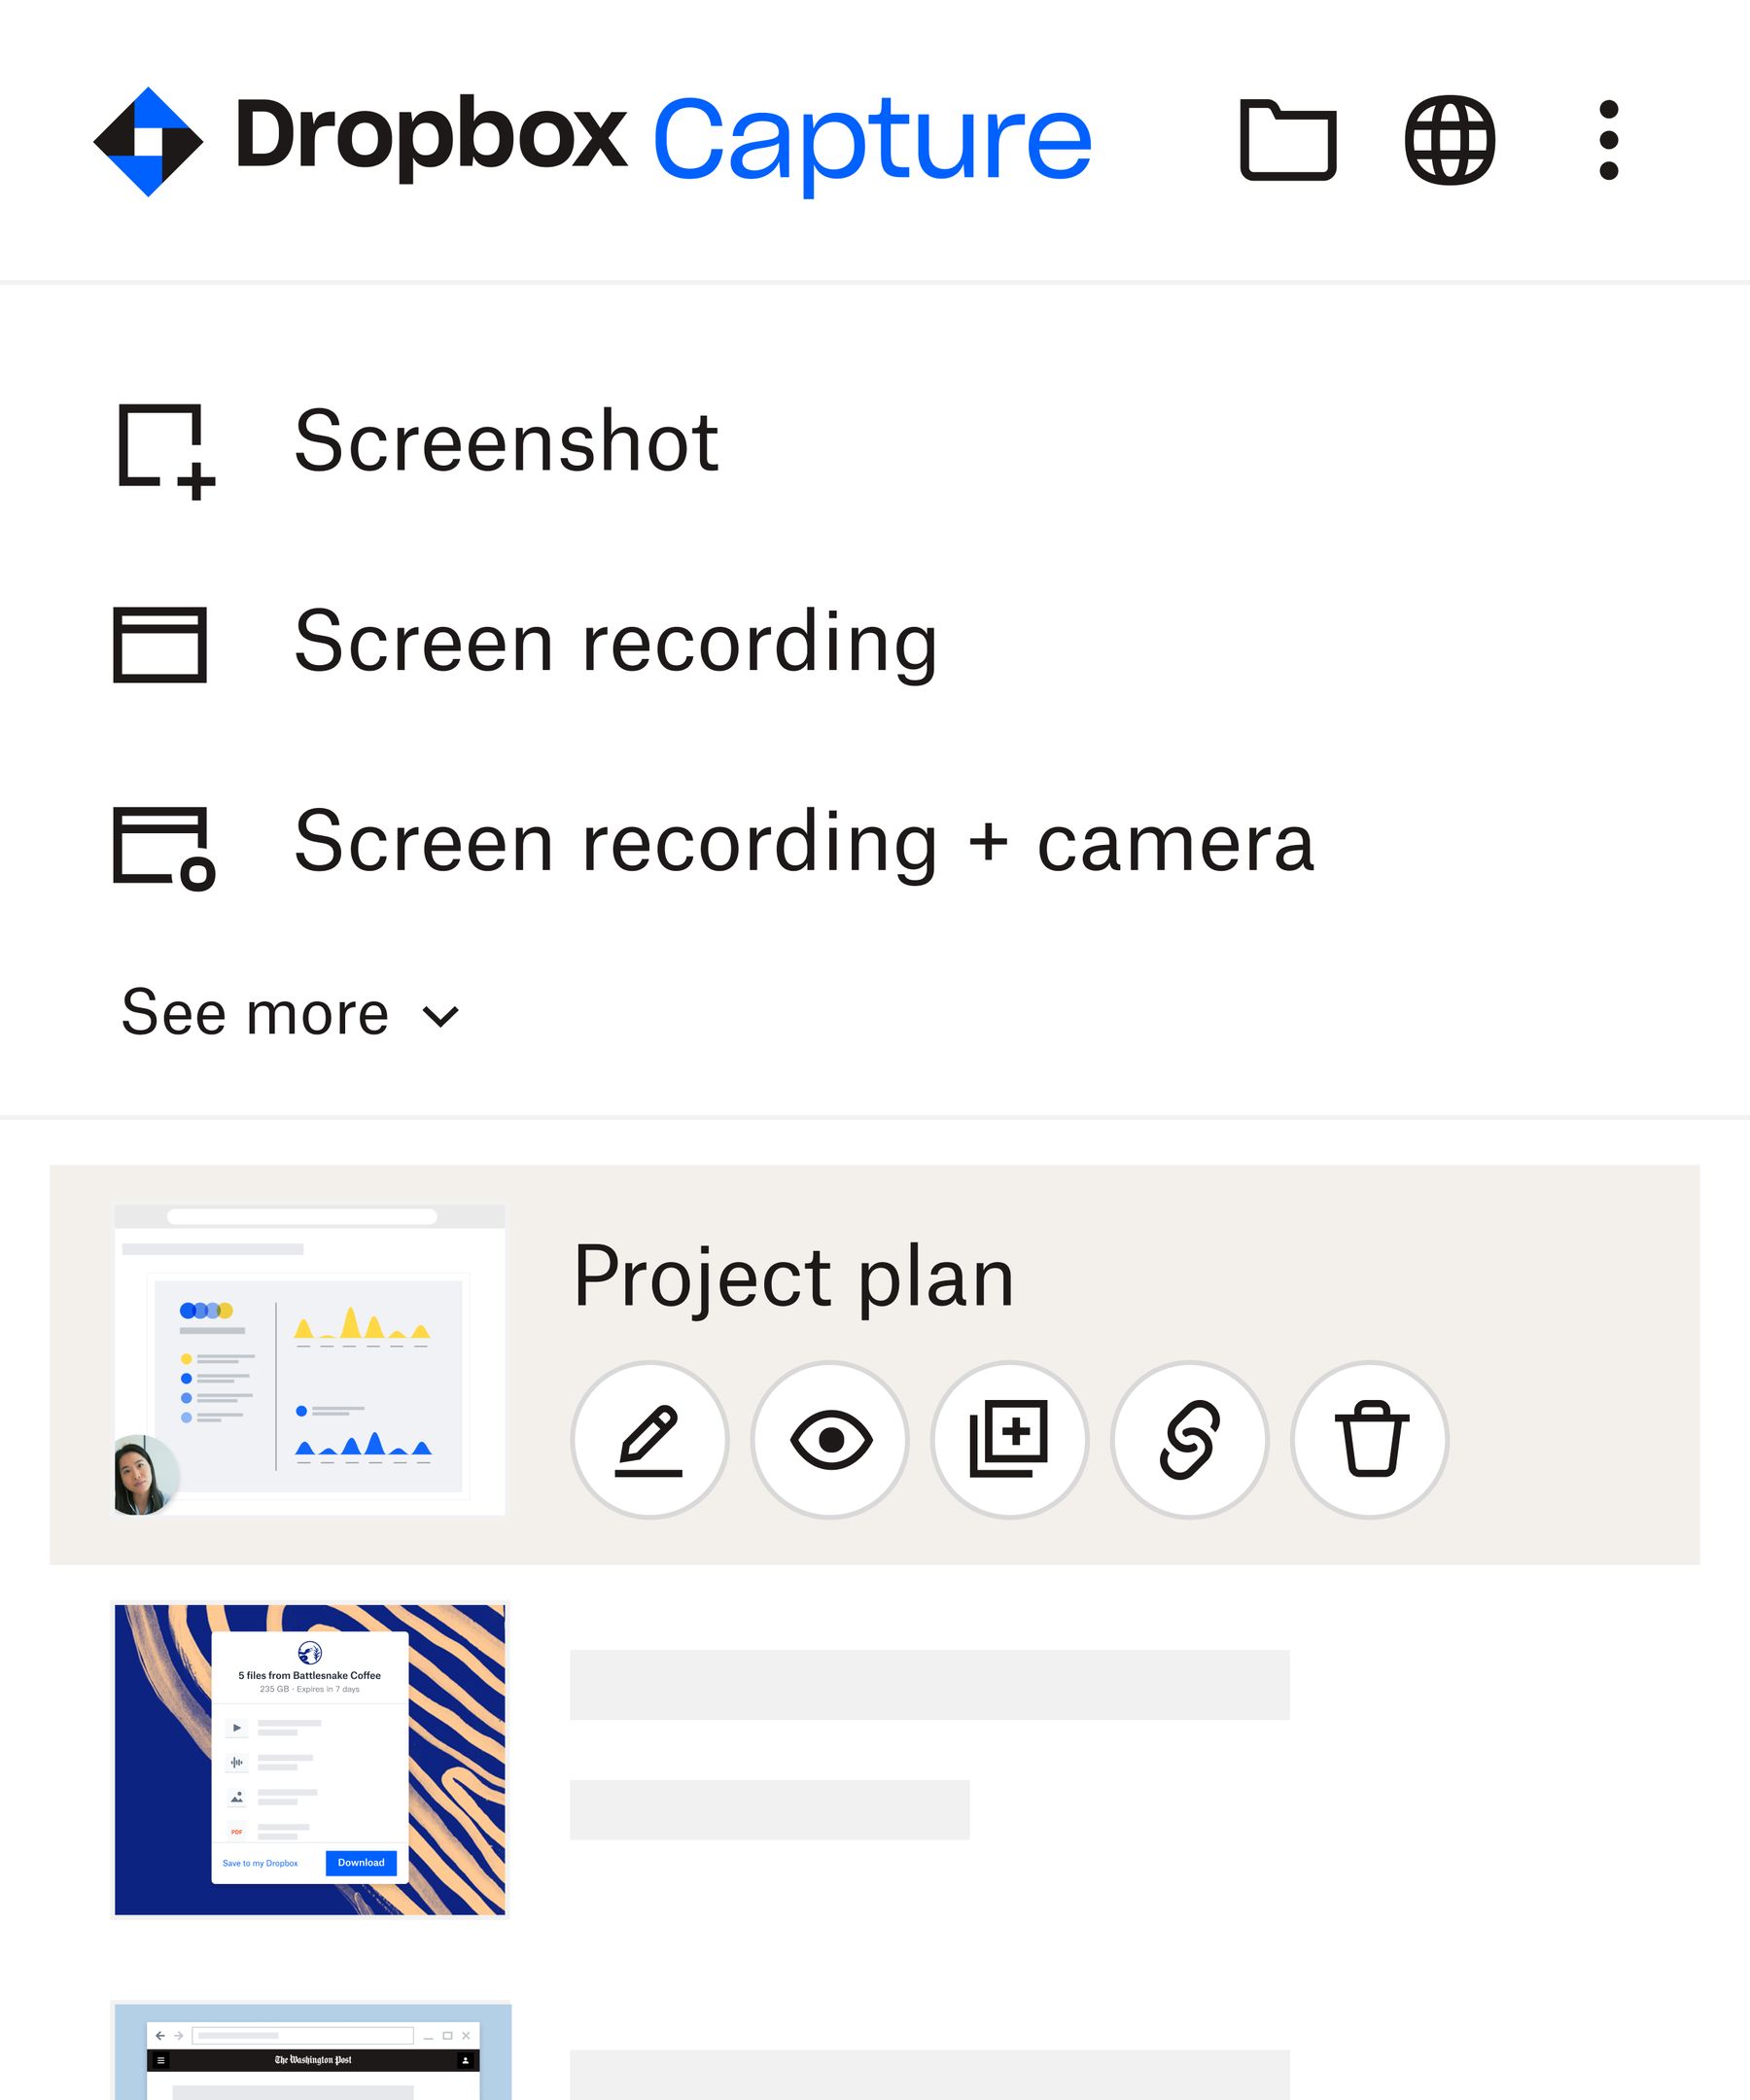 A visual representation of the Dropbox Capture desktop app interface, demonstrating the recording options available.